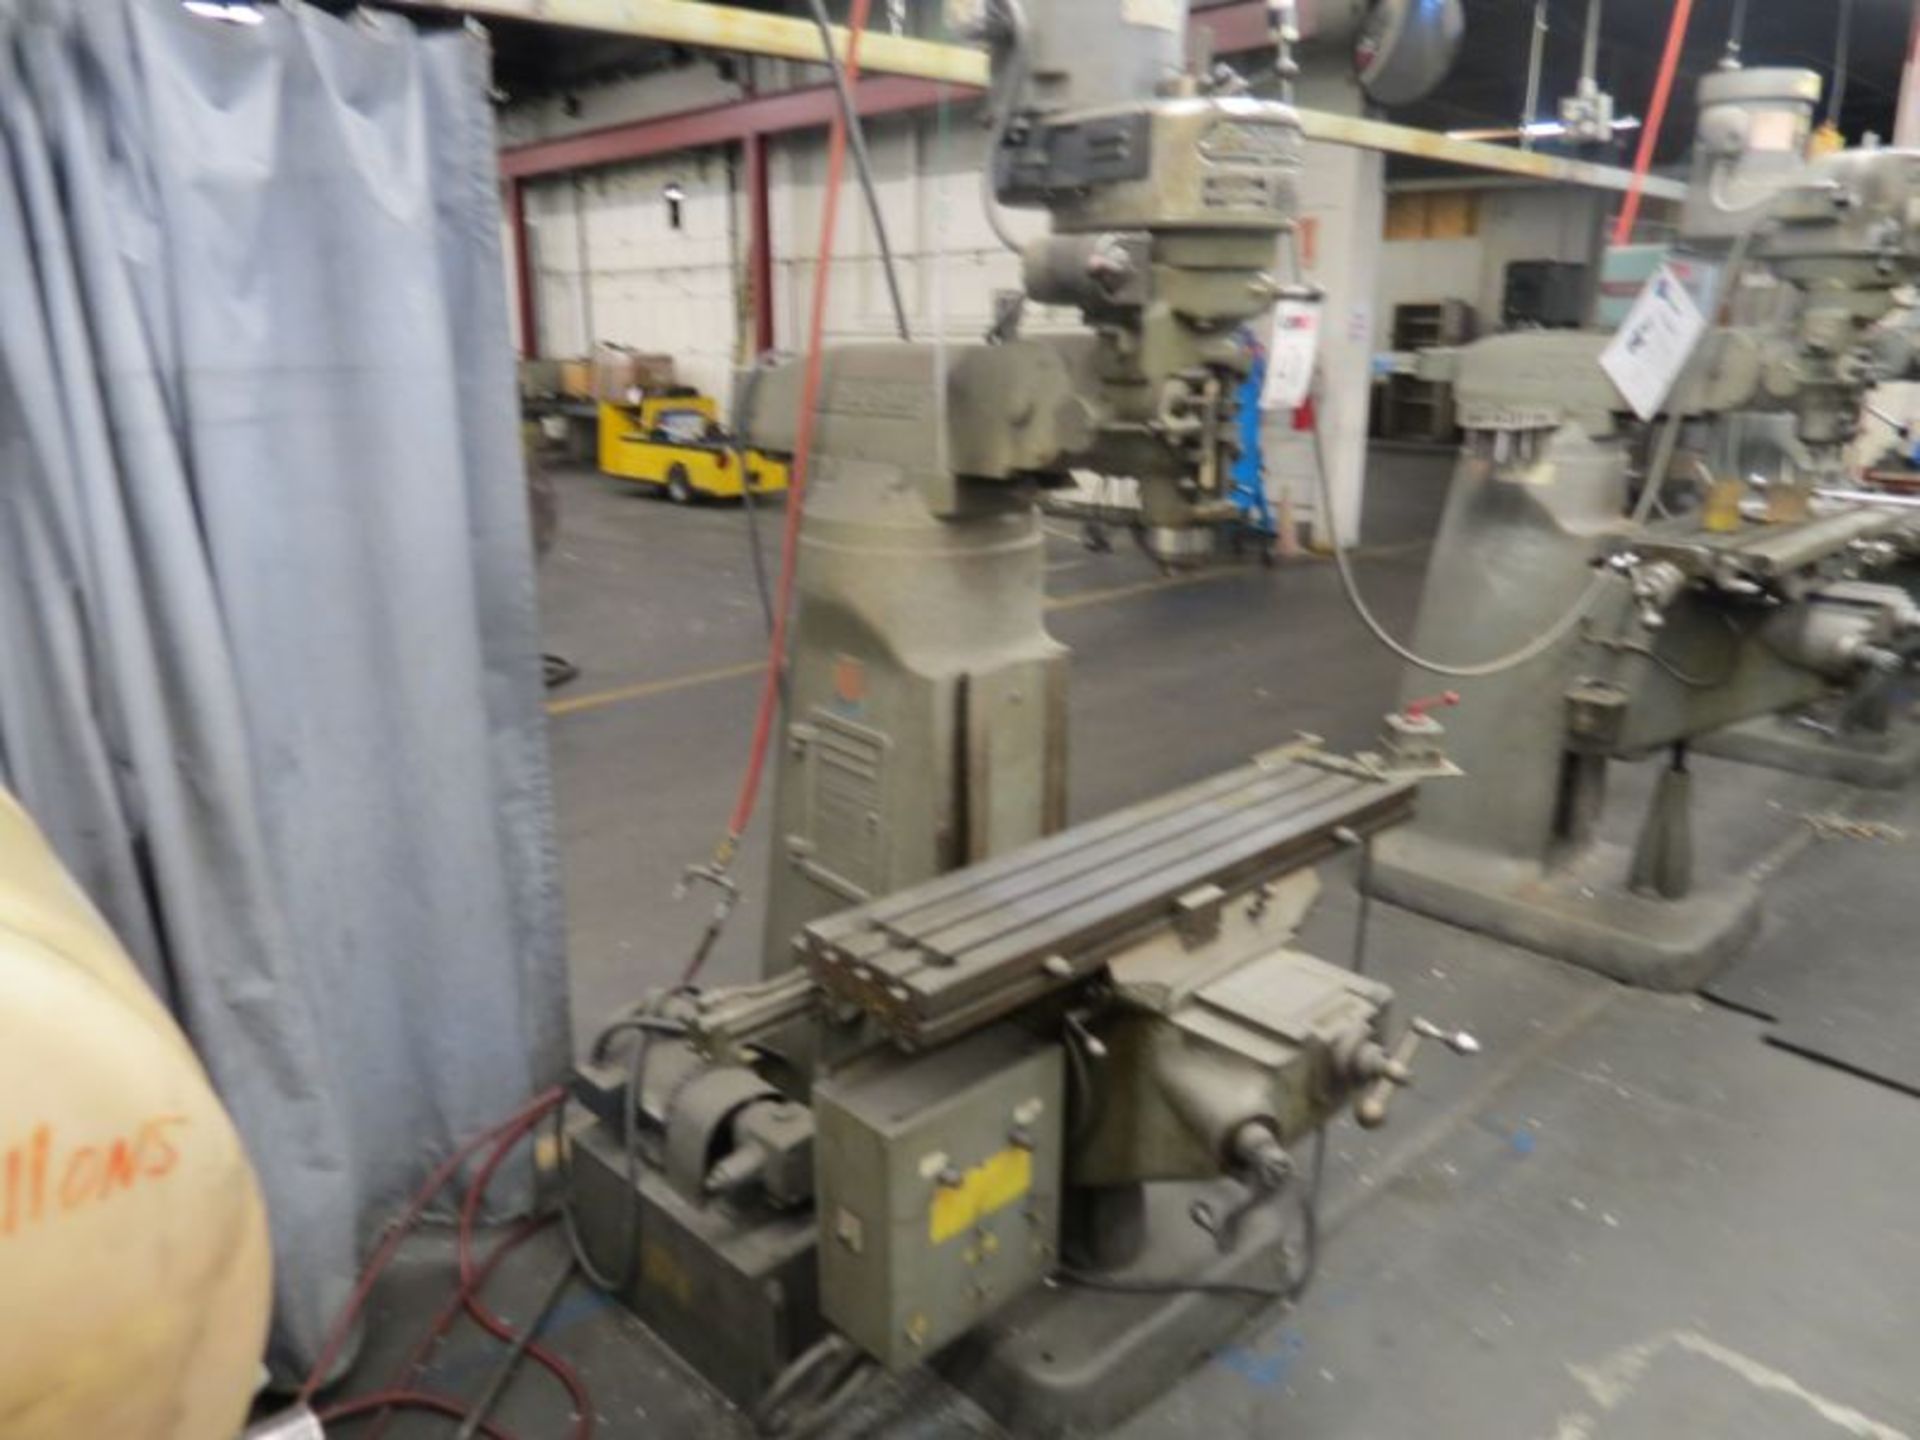 Bridgeport Vertical Mill 9" x 42" Table, w/ Hydraulic X-Axis Feed, s/n J115054 - Image 3 of 5